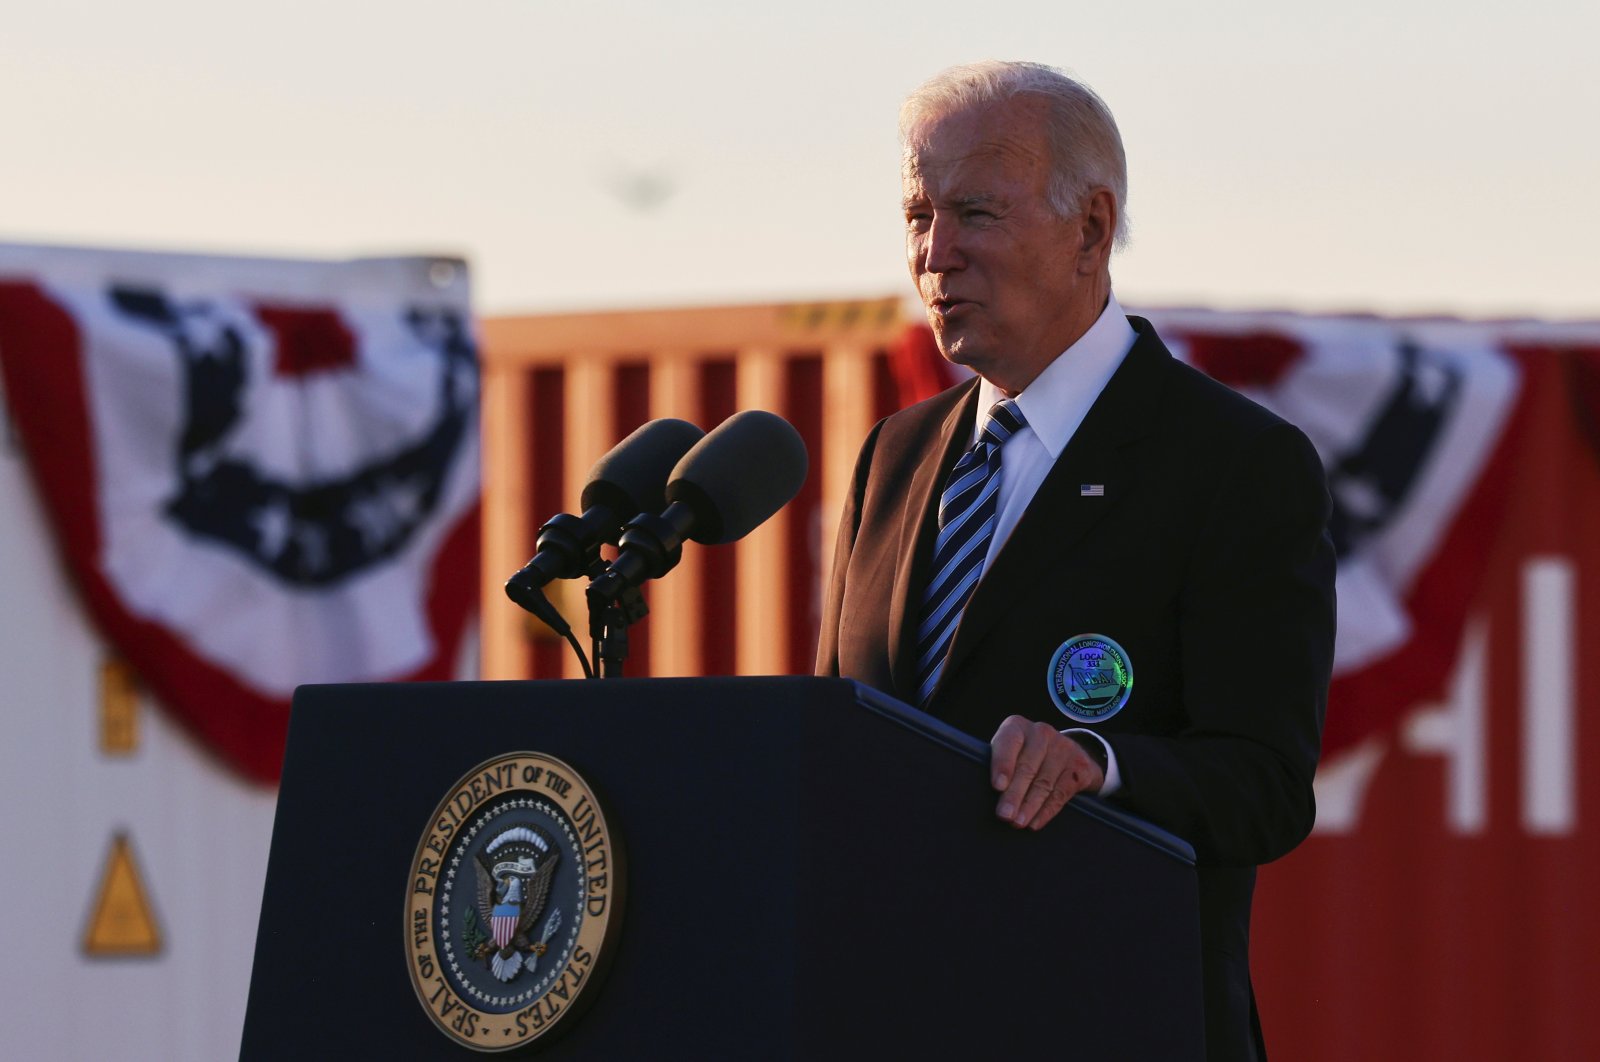 U.S. President Joe Biden delivers a speech during a visit to the Port of Baltimore, Maryland, U.S., Nov. 10, 2021. (Reuters Photo)